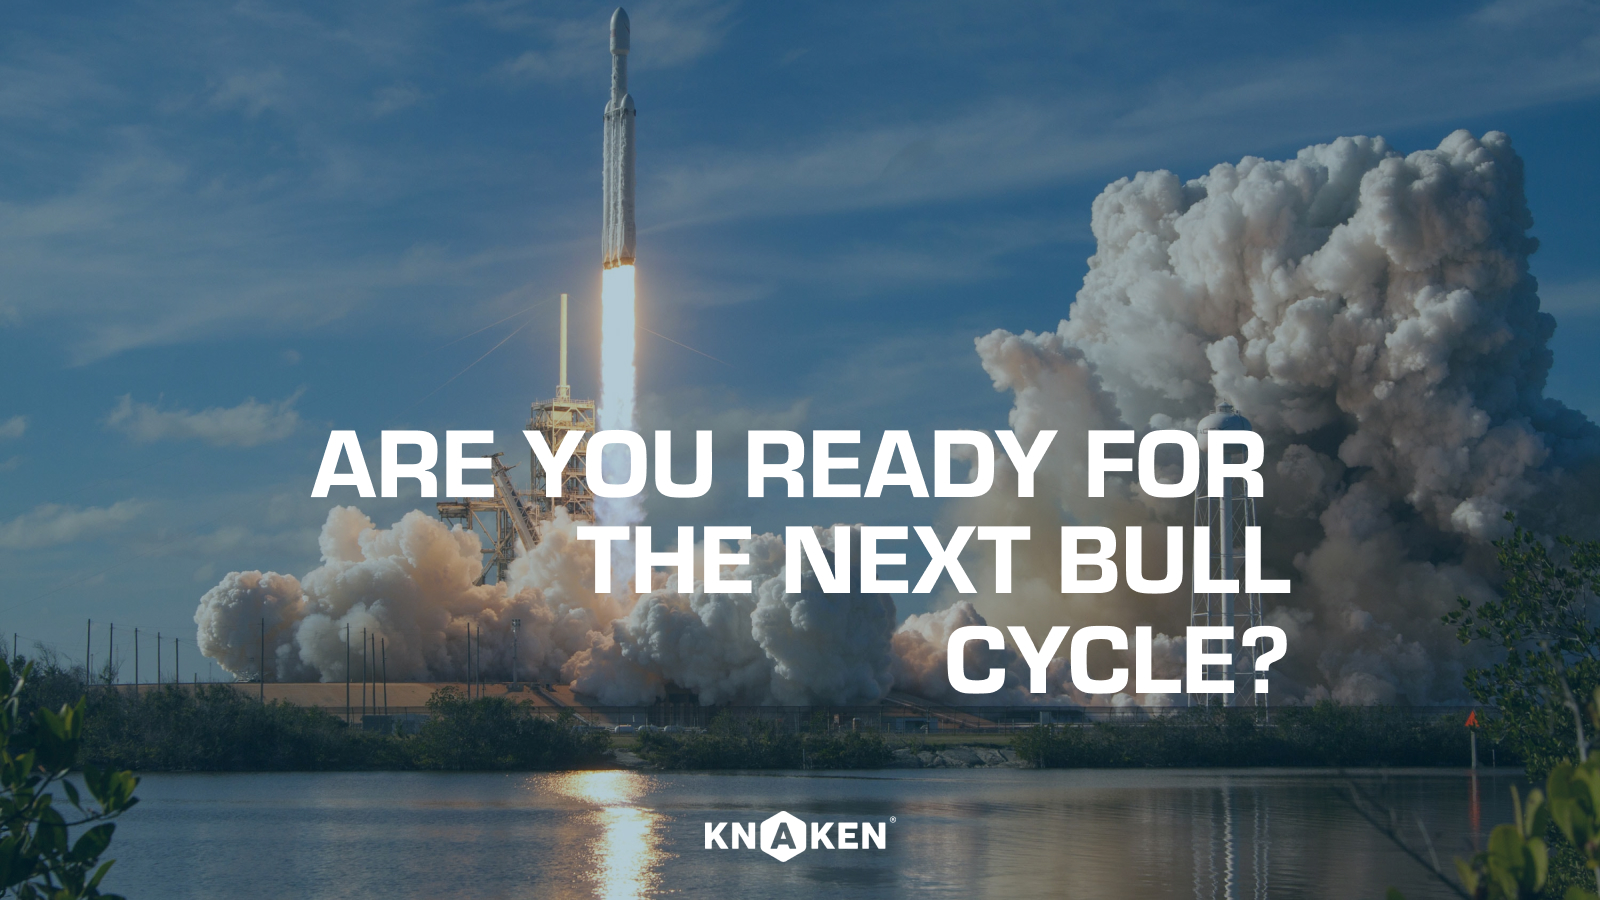 Are You Ready for the Next Bull Cycle?